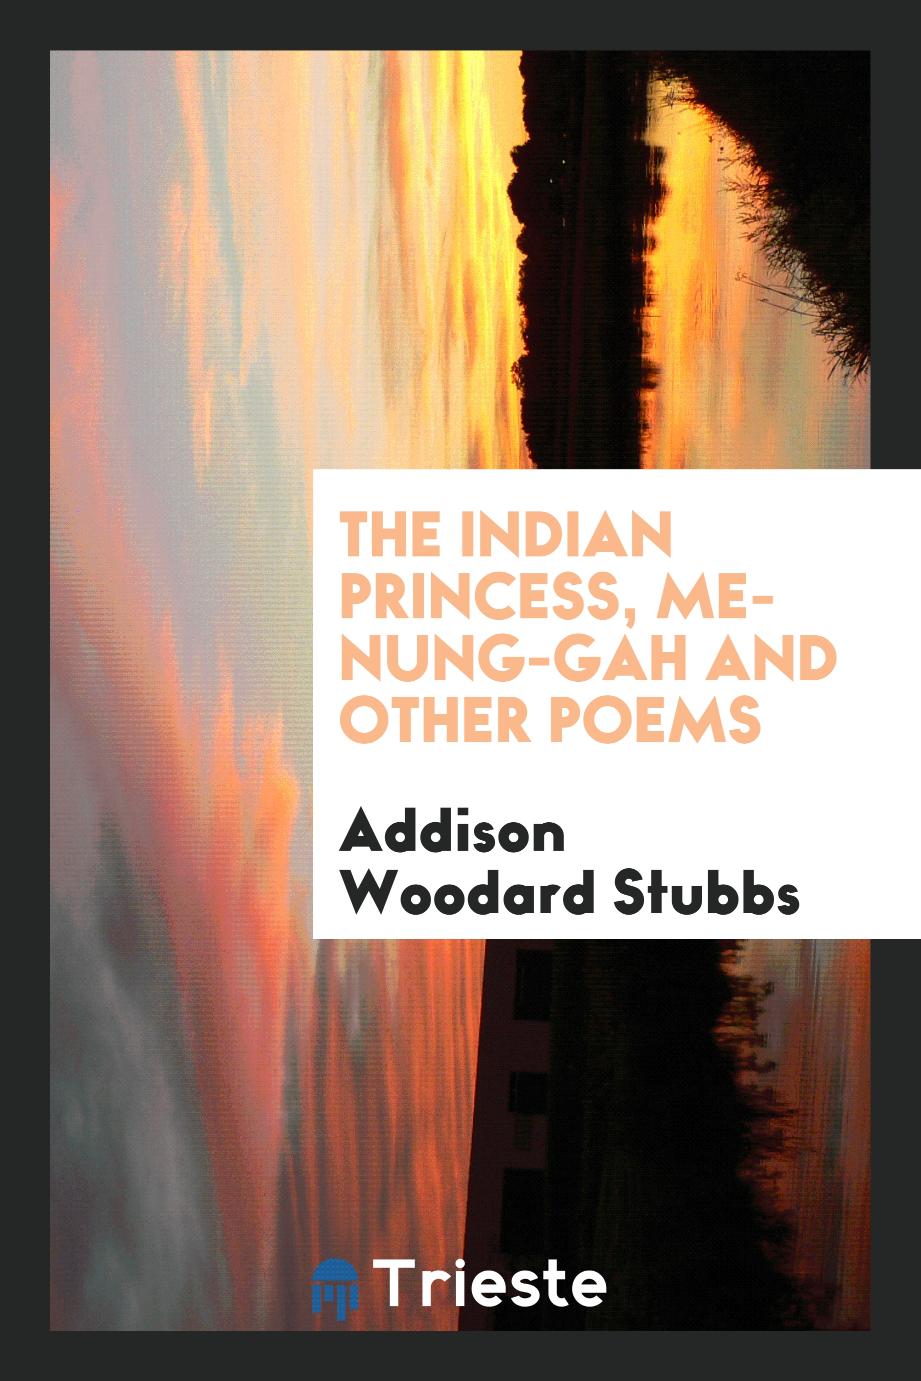 The Indian Princess, Me-Nung-Gah and Other Poems